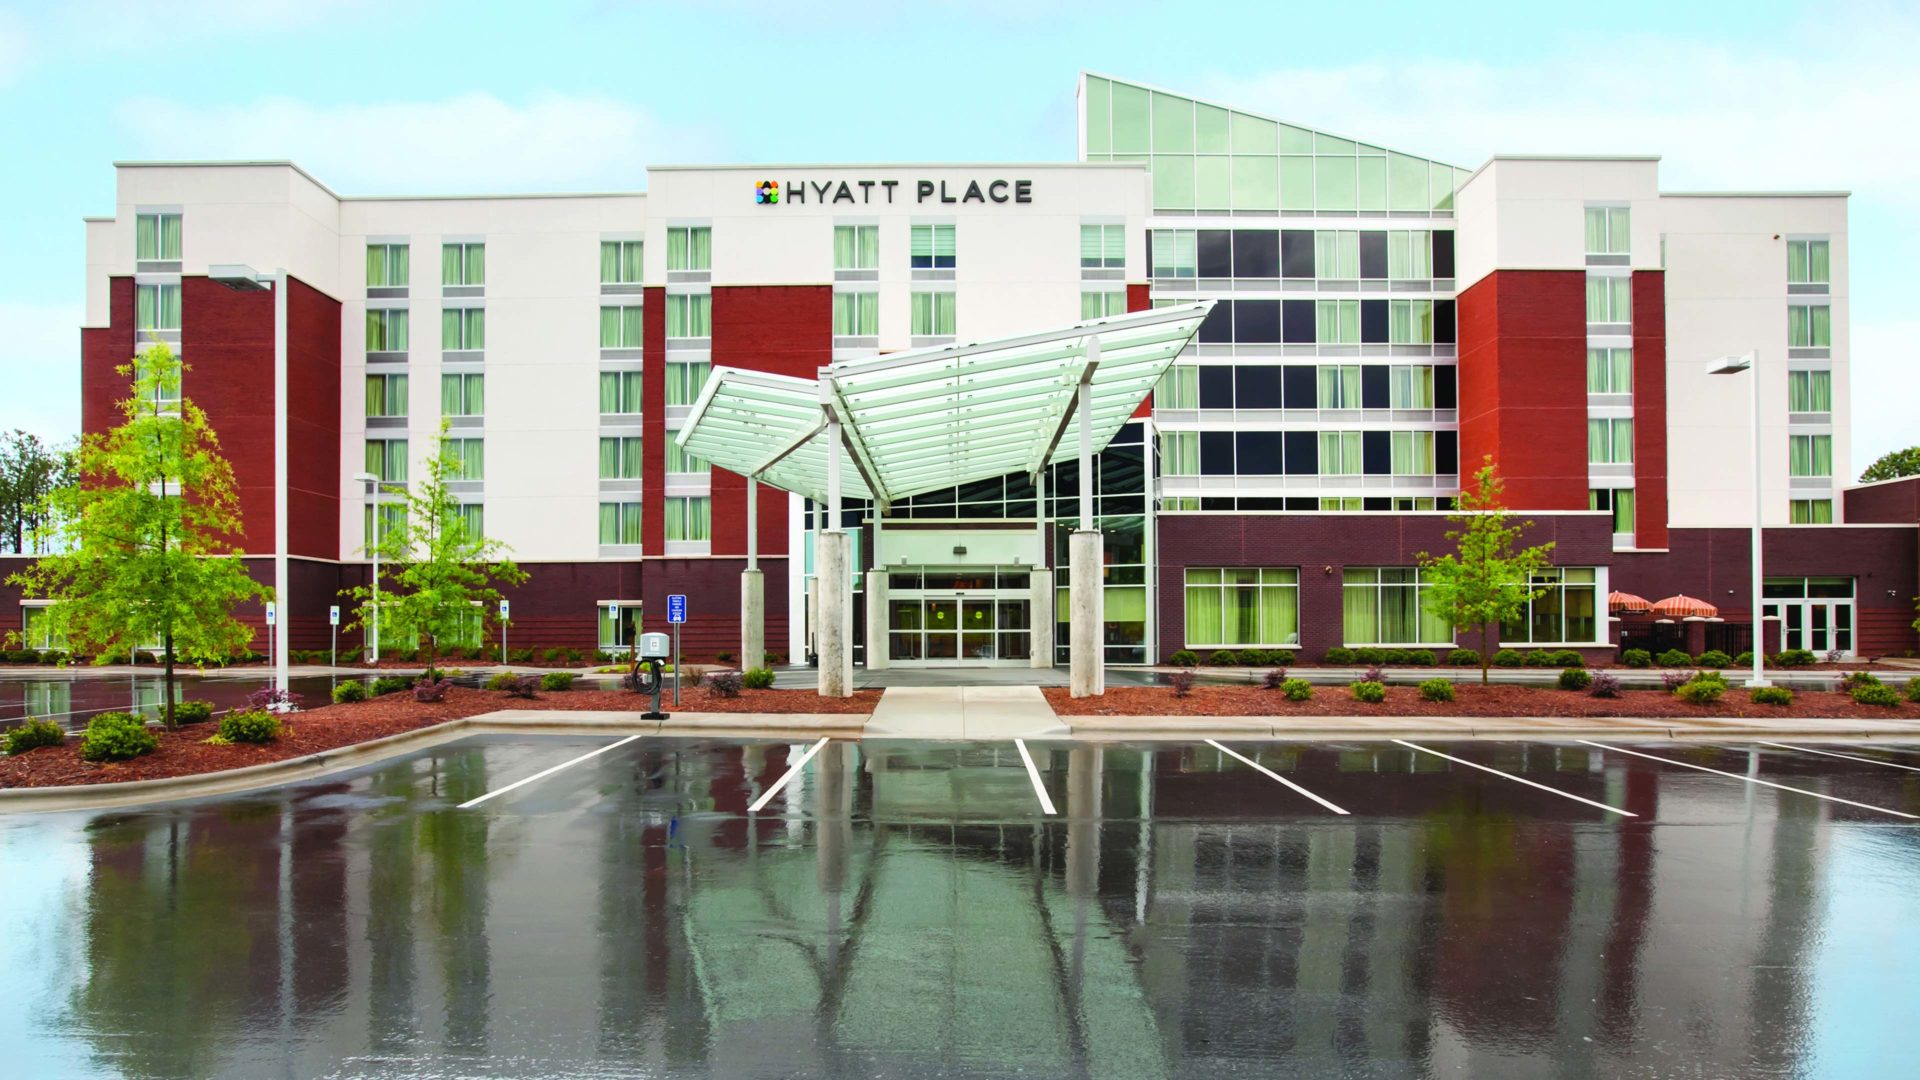 Hyatt Place Raleigh/cary is a gay and lesbian friendly